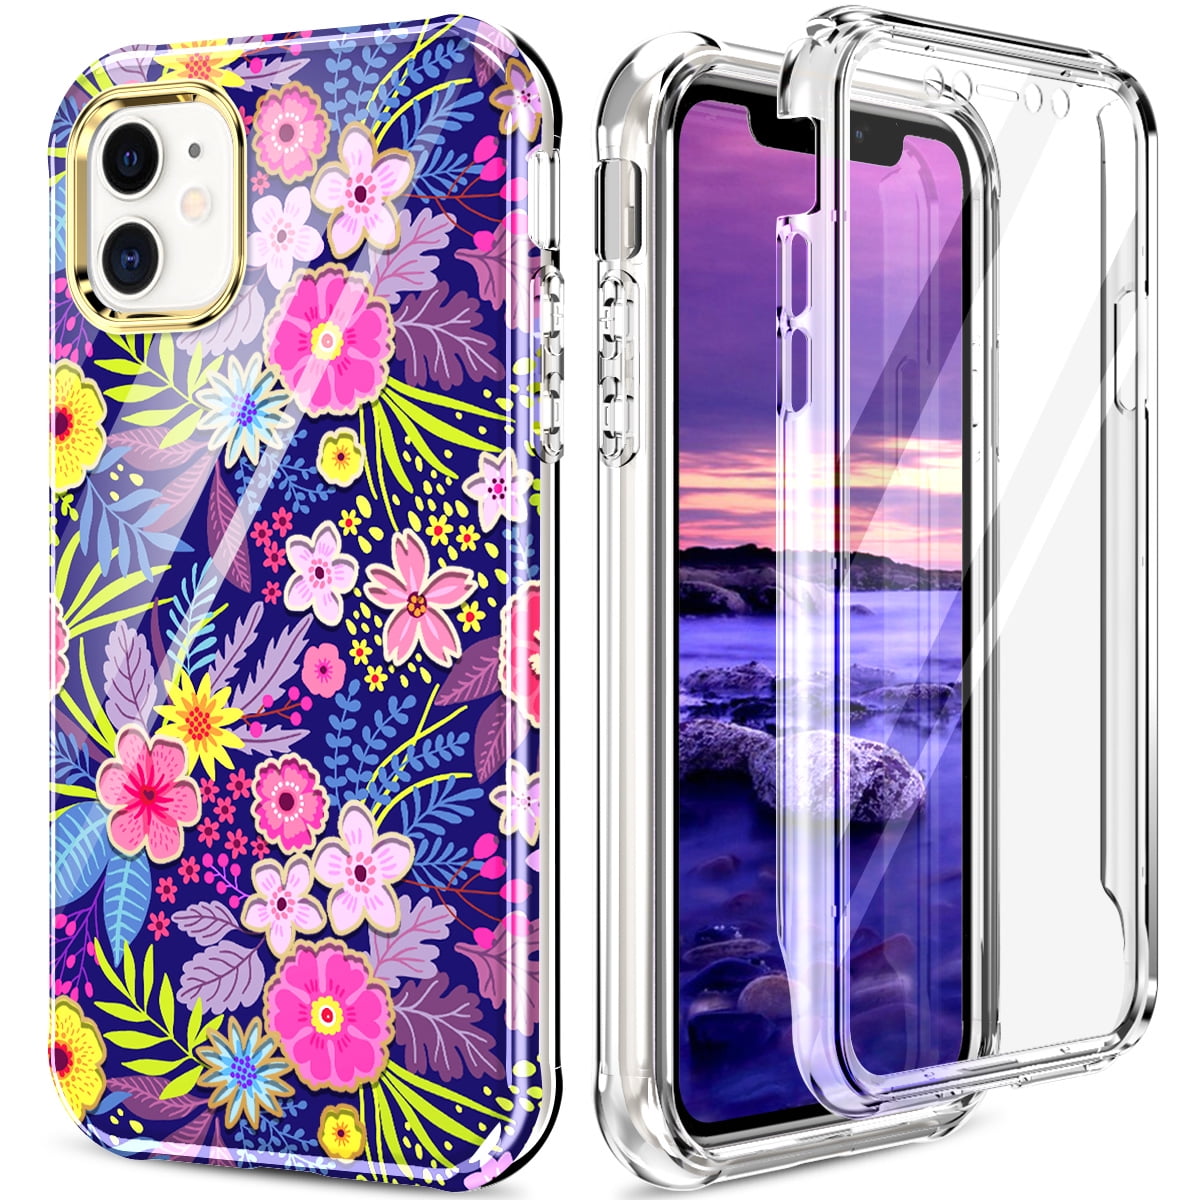 iPhone 11 6.1 Case with Built in Screen Protector, Allytech Full Body  Shockproof Dual Layer High Impact Protective Anti-Scratch Soft TPU Cover  Cases for iPhone 11 6.1 inch 2019, Clear 